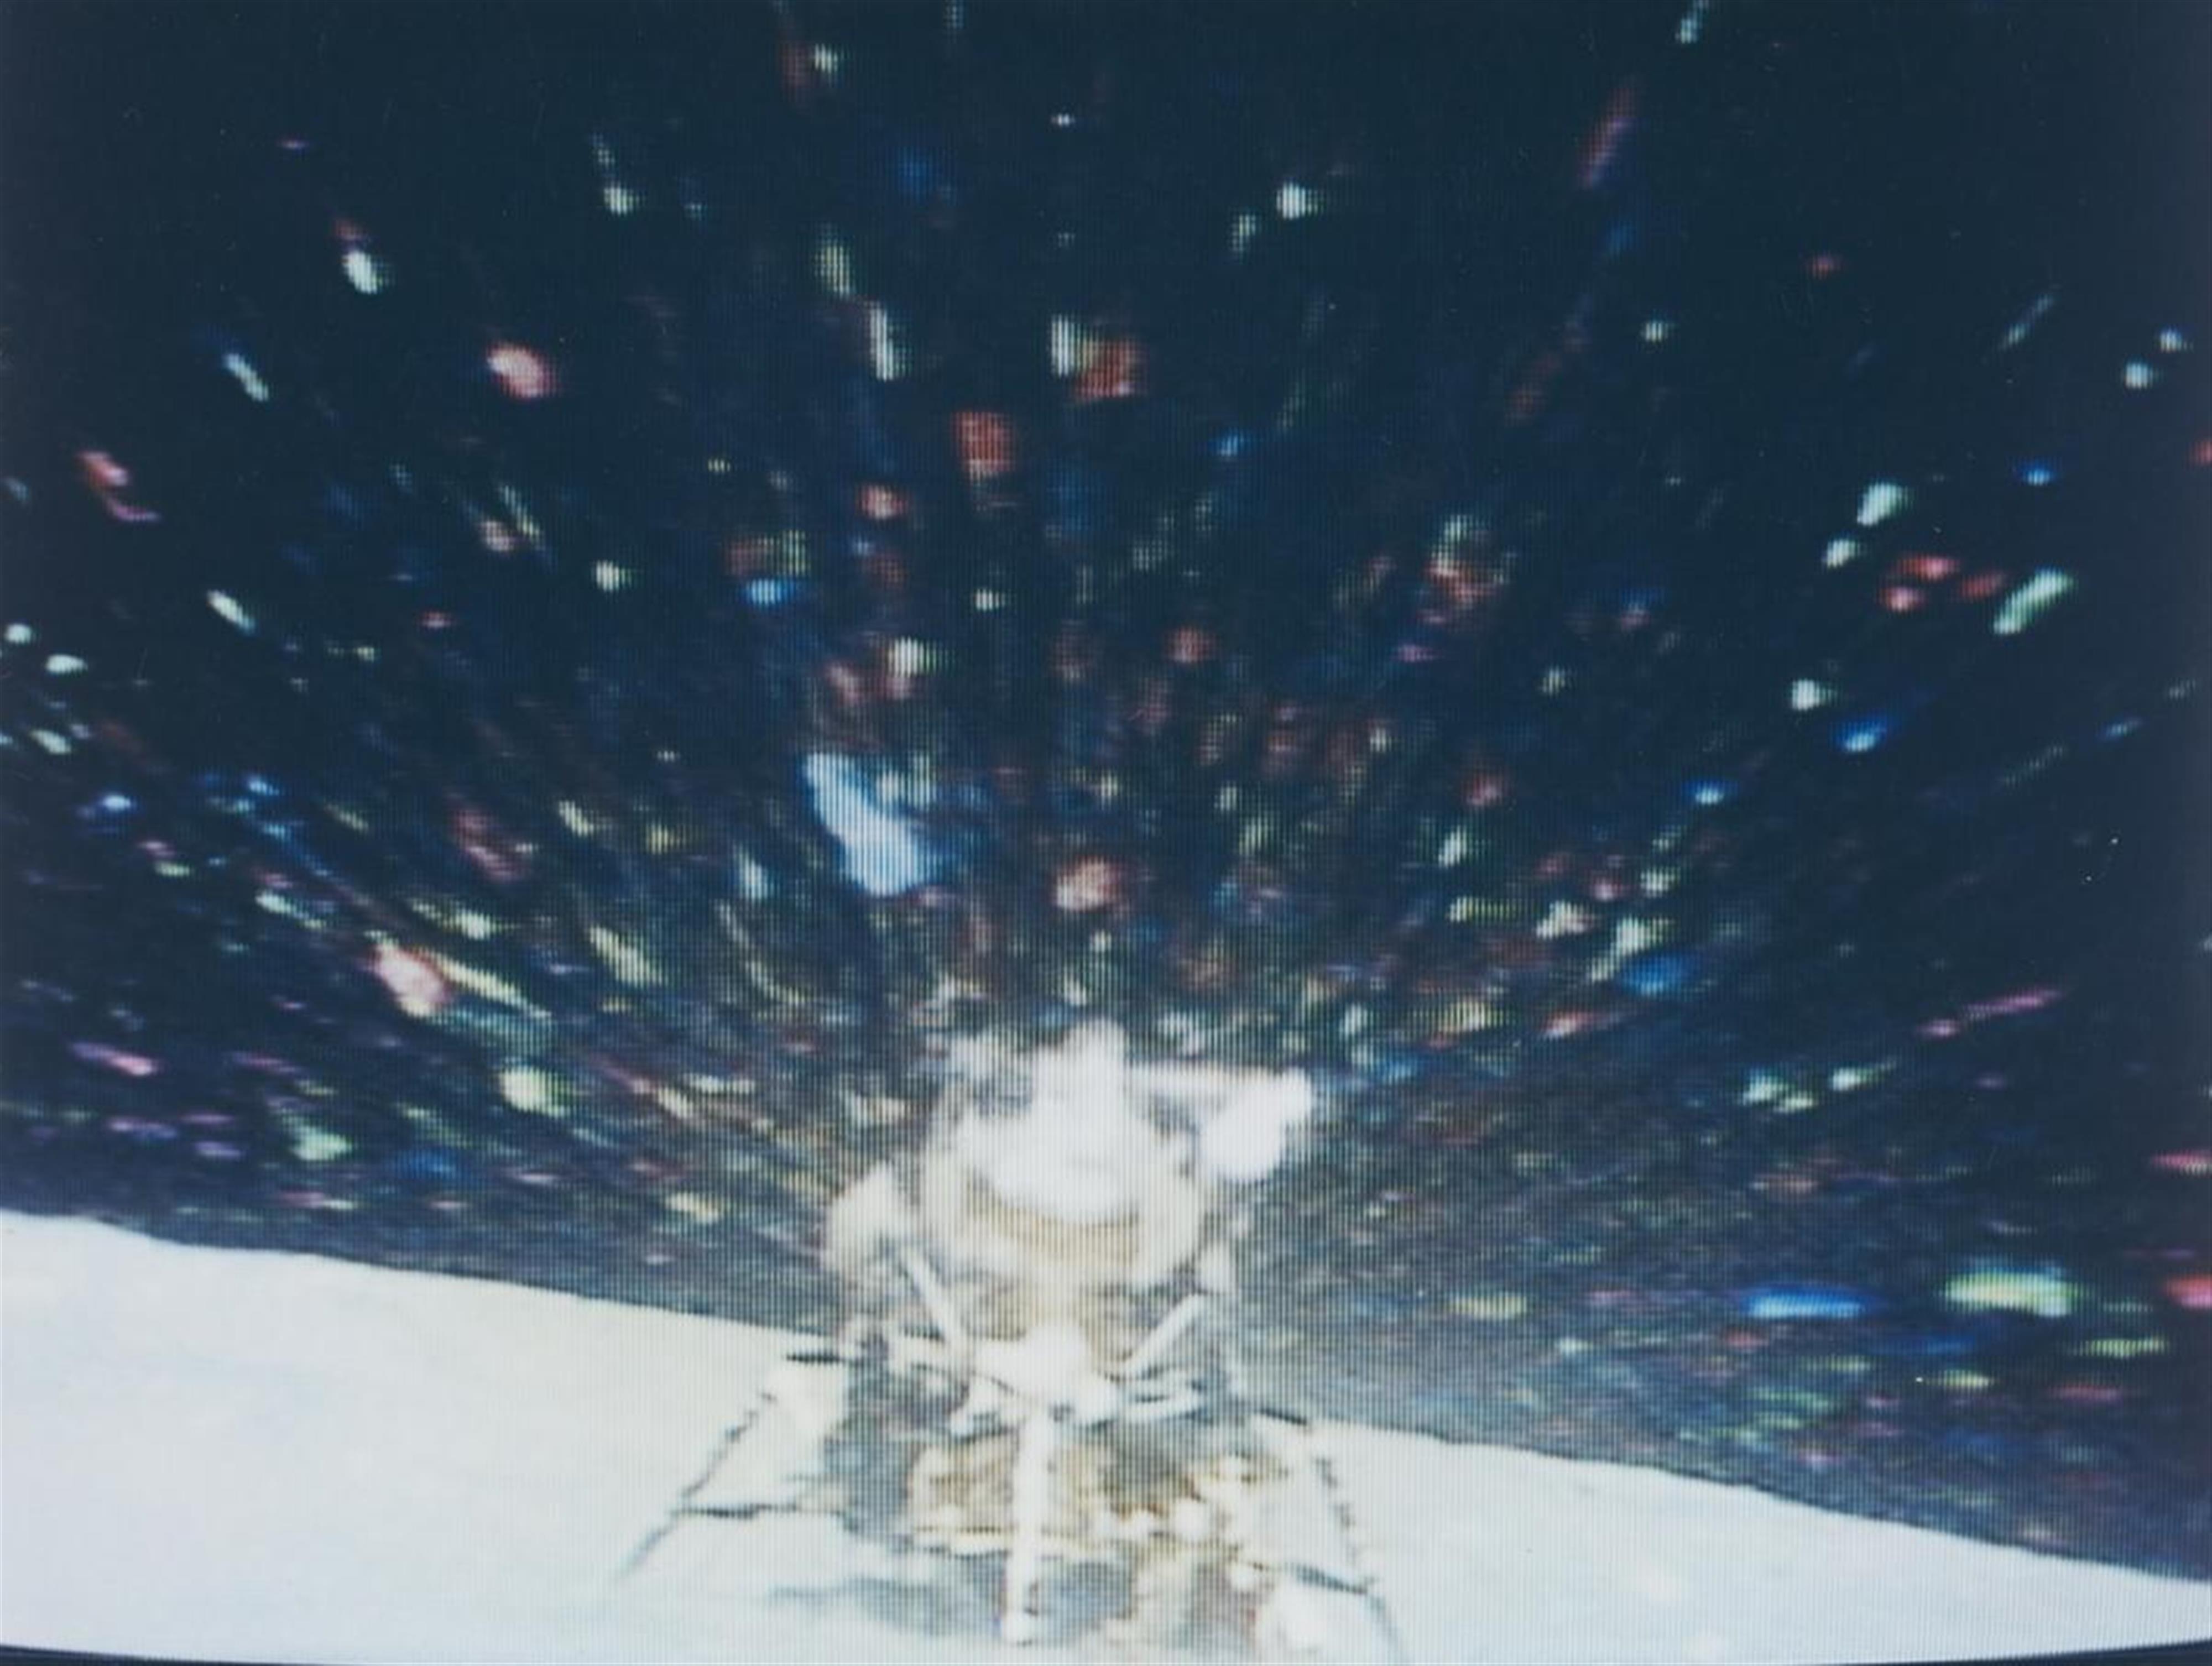 NASA - TV picture, Apollo 16: Lunar module "Orion", liftoff from the lunar surface - image-1